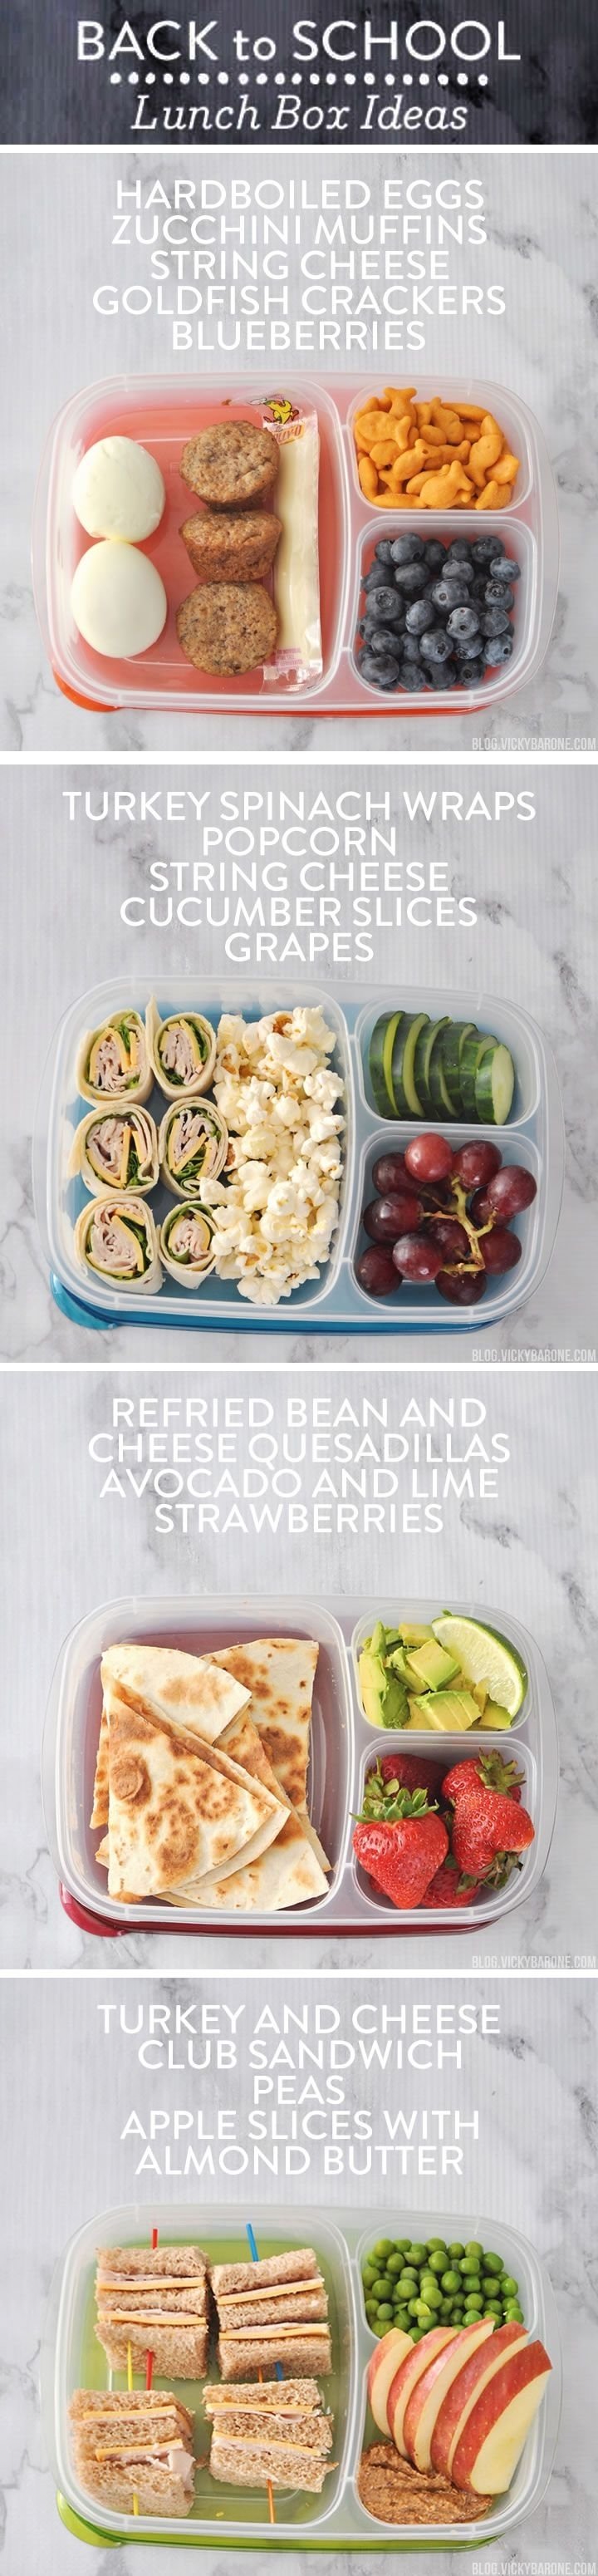 10 Best Best Lunch Ideas For Work 37 best lunch box ideas images on pinterest lunches health foods 2022